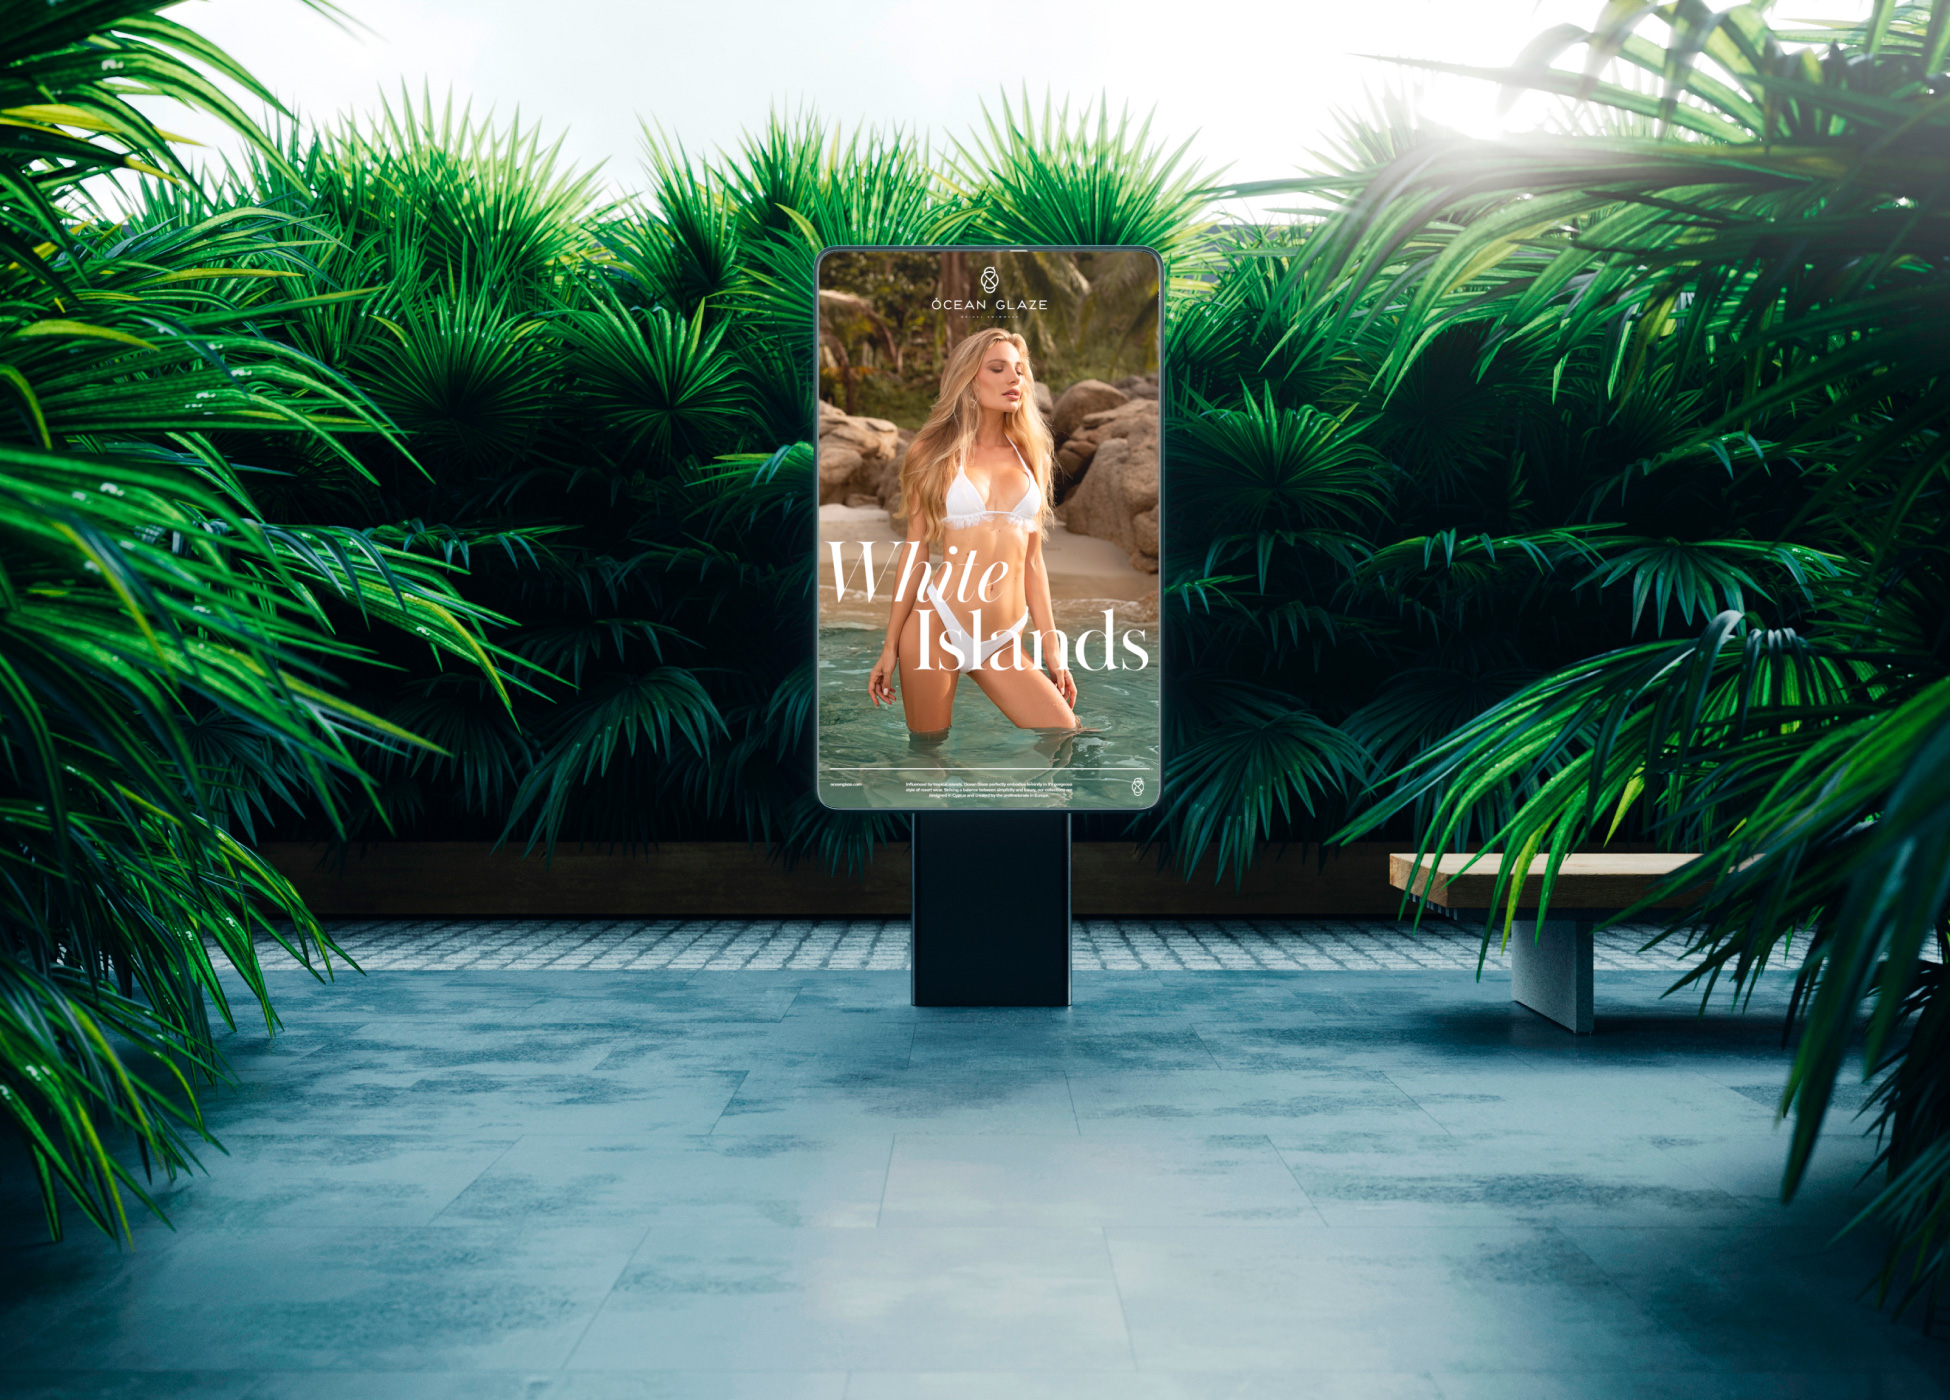 Banner with a model in a swimsuit among palm trees. Design illustration for the Ocean Glaze brand